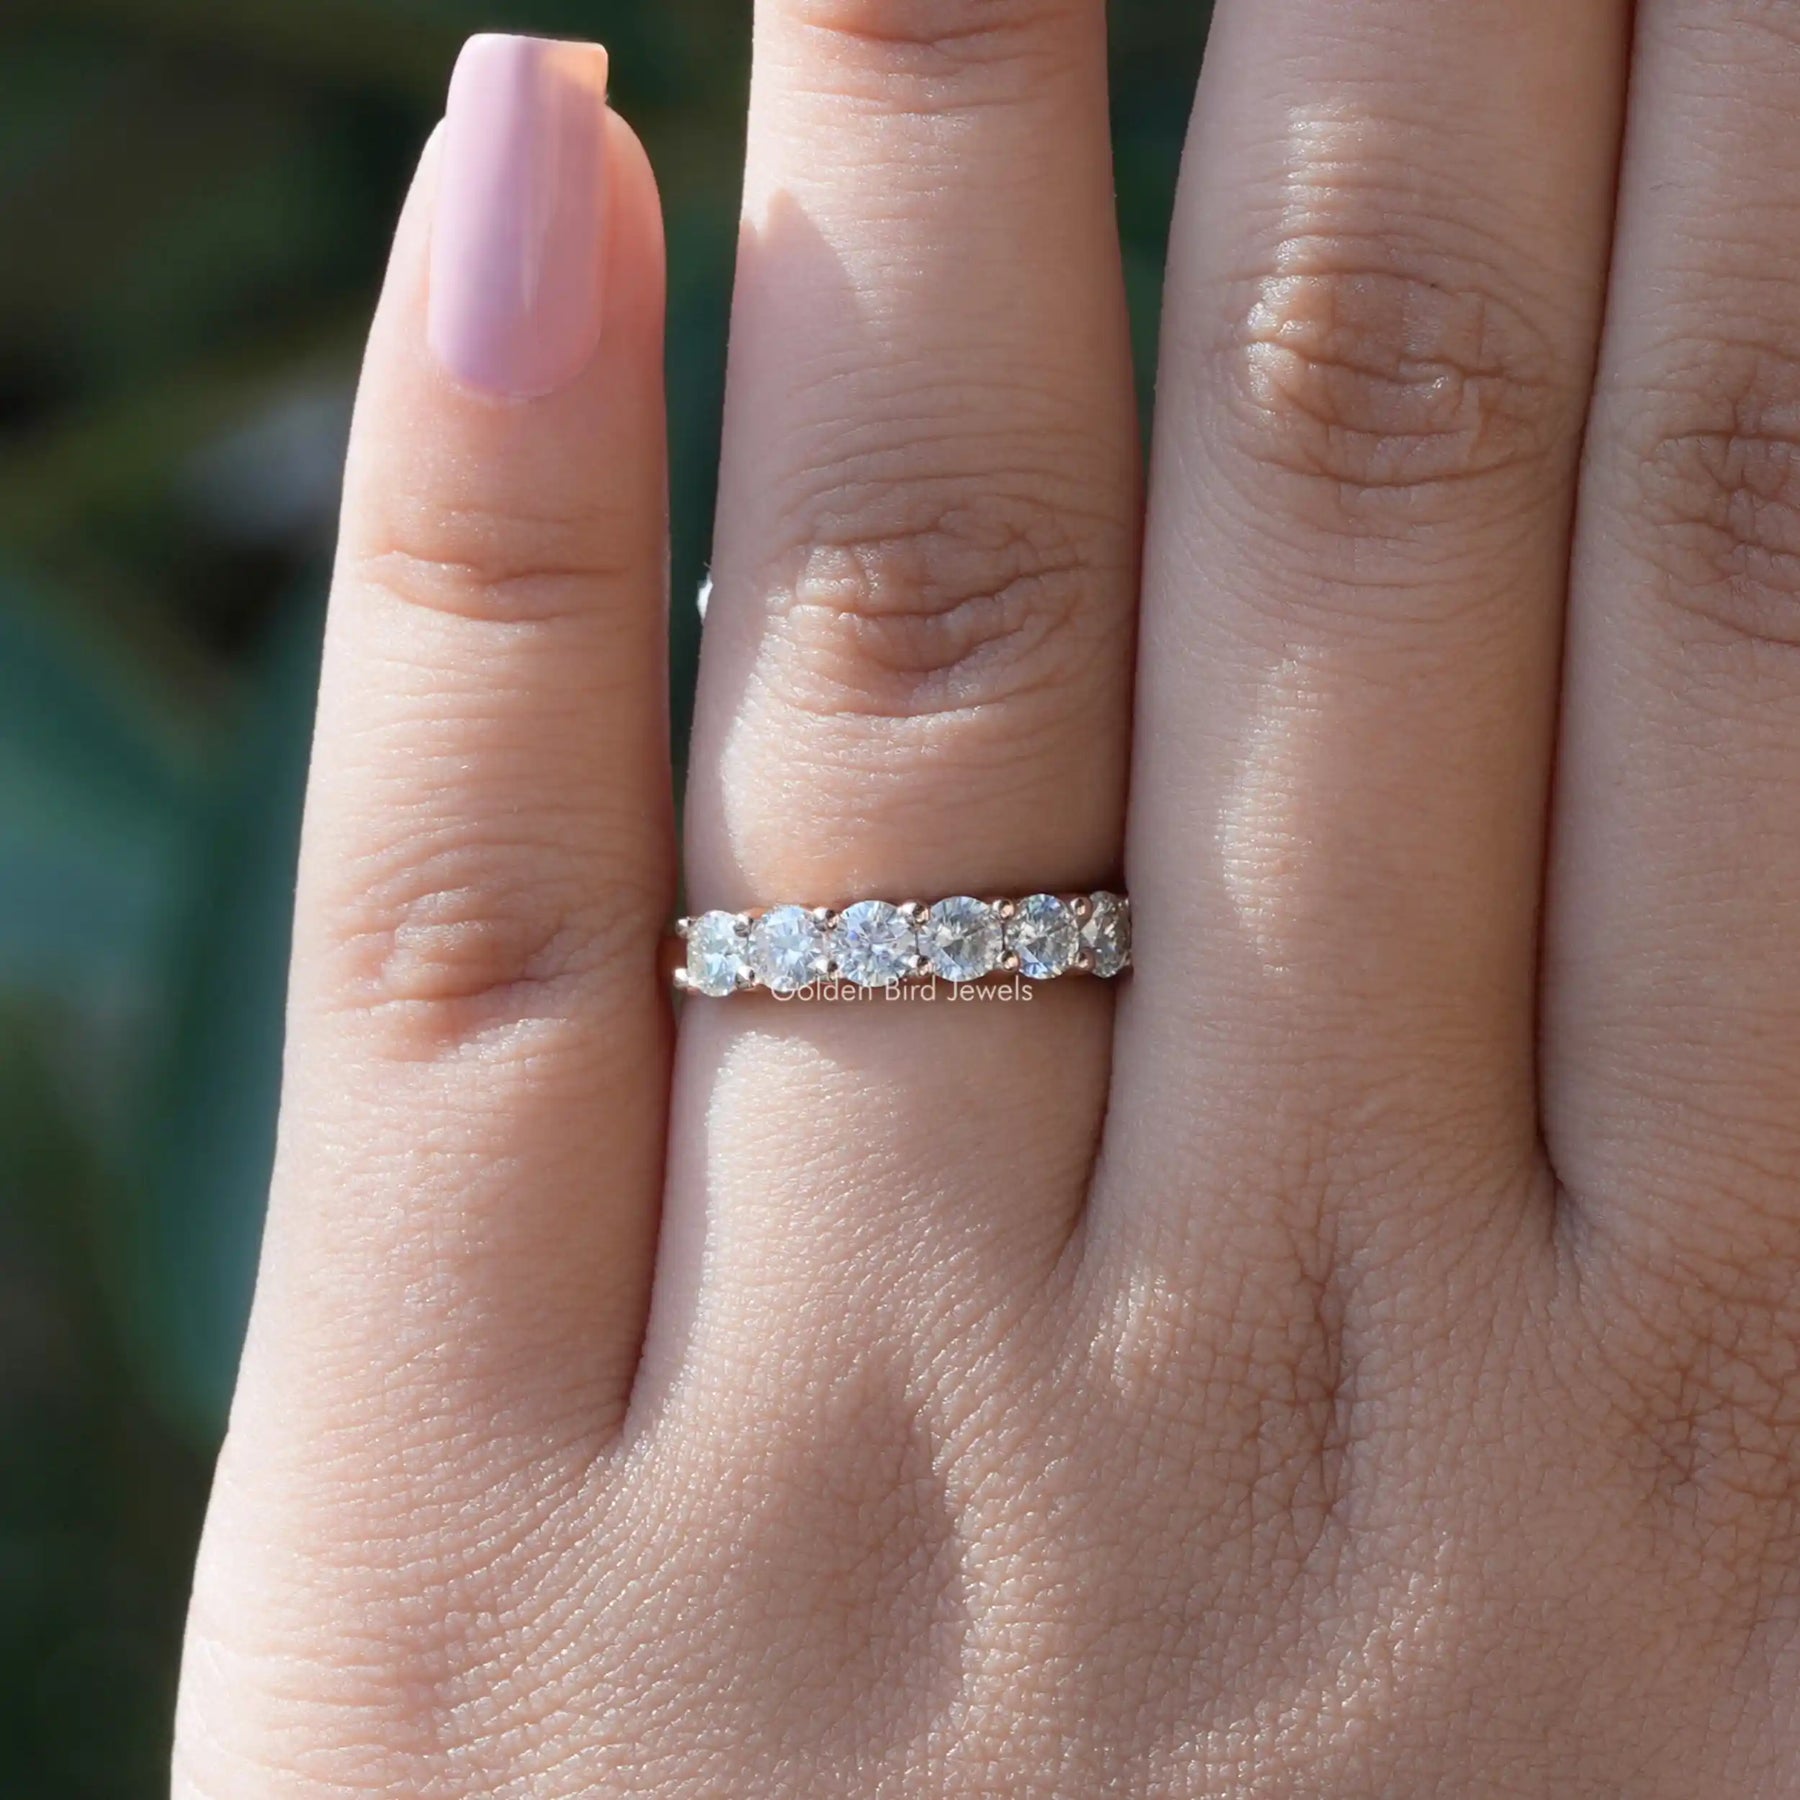 [In finger front view of round cut moissanite anniversary band]-[Golden Bird Jewels]